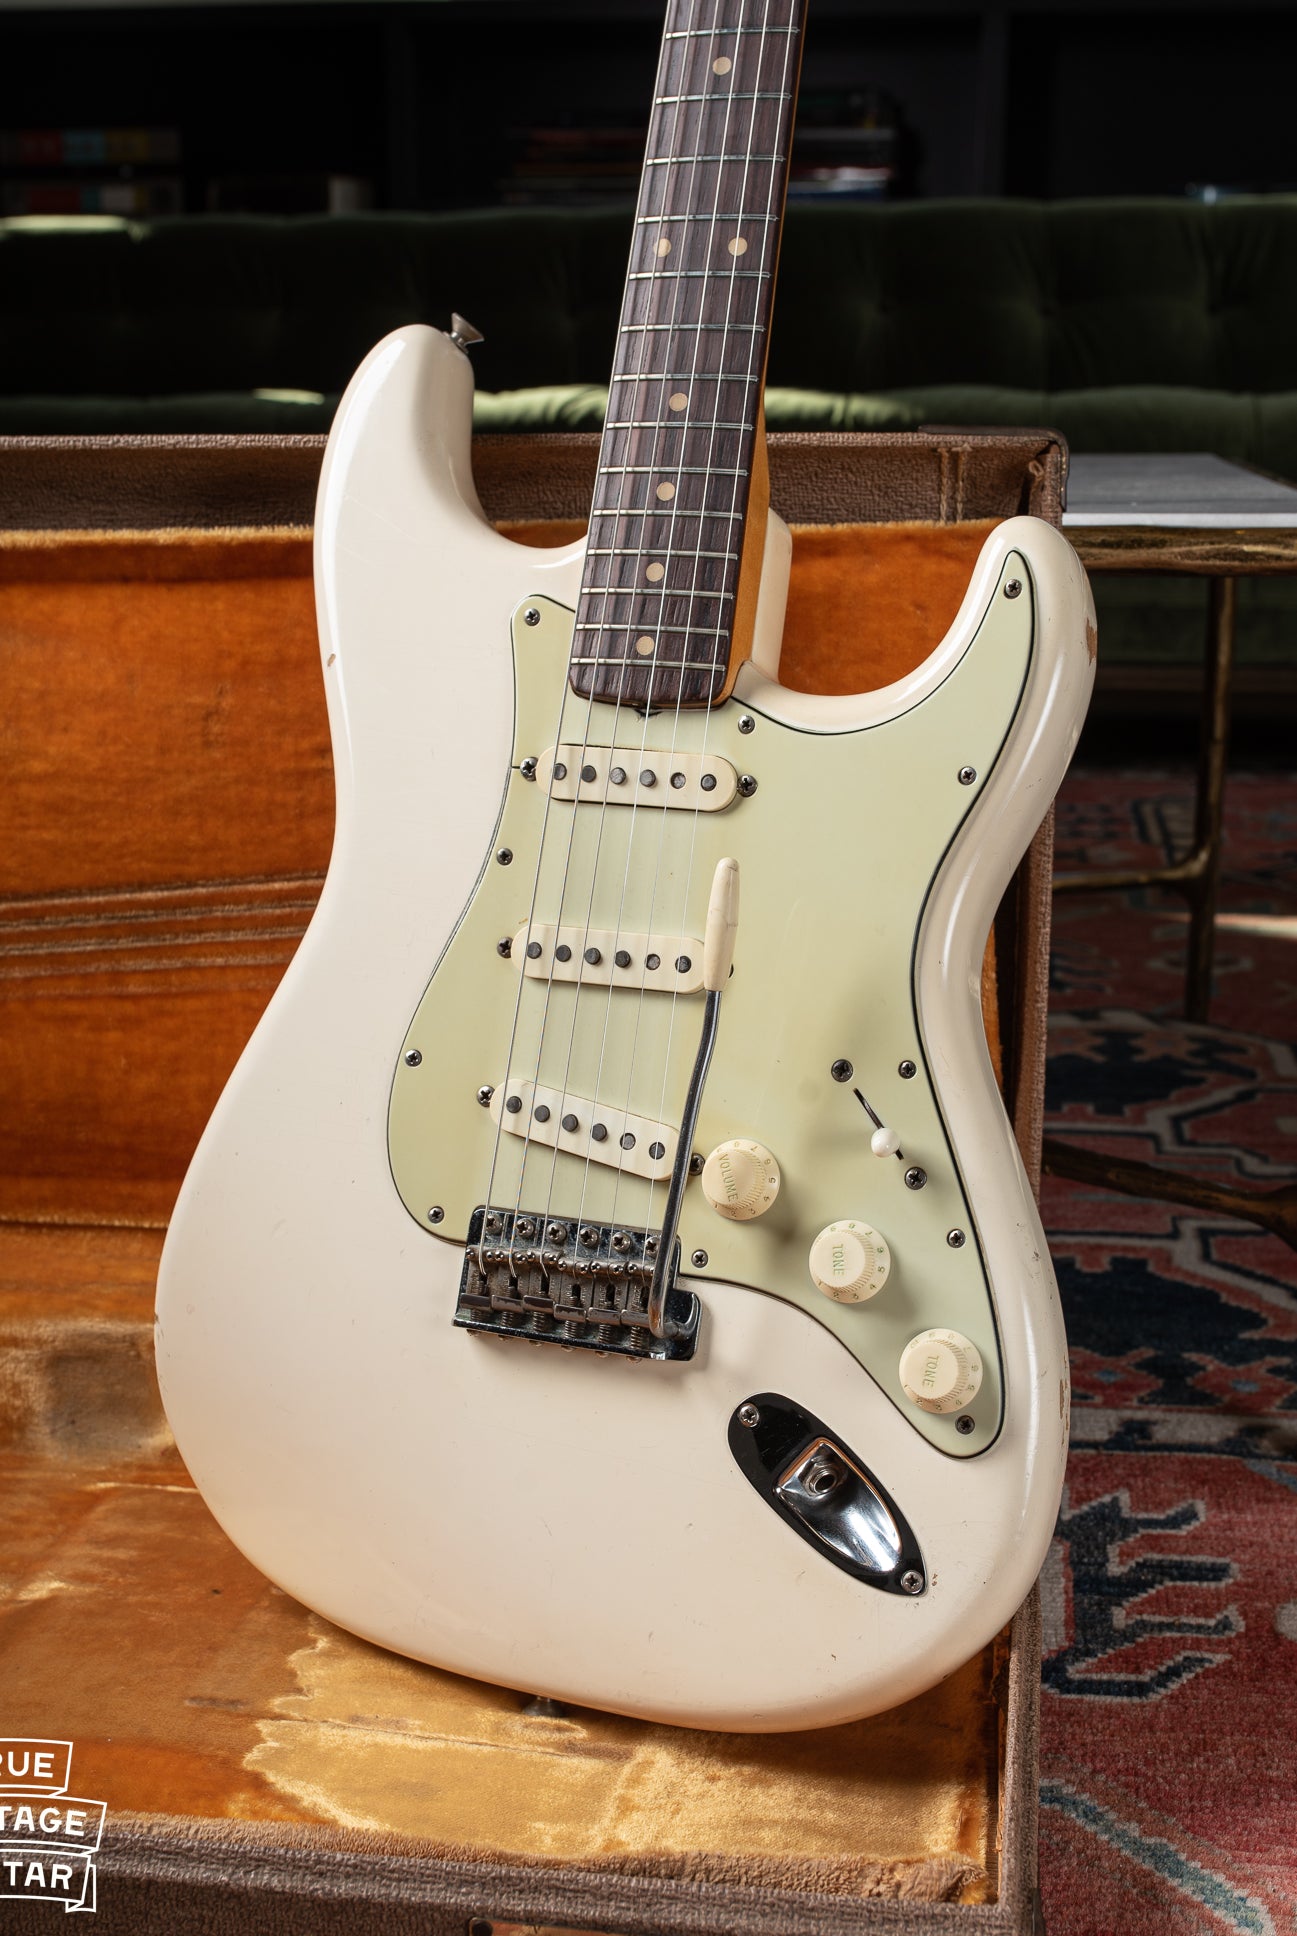 1961 Fender Stratocaster guitar with Olympic White finish